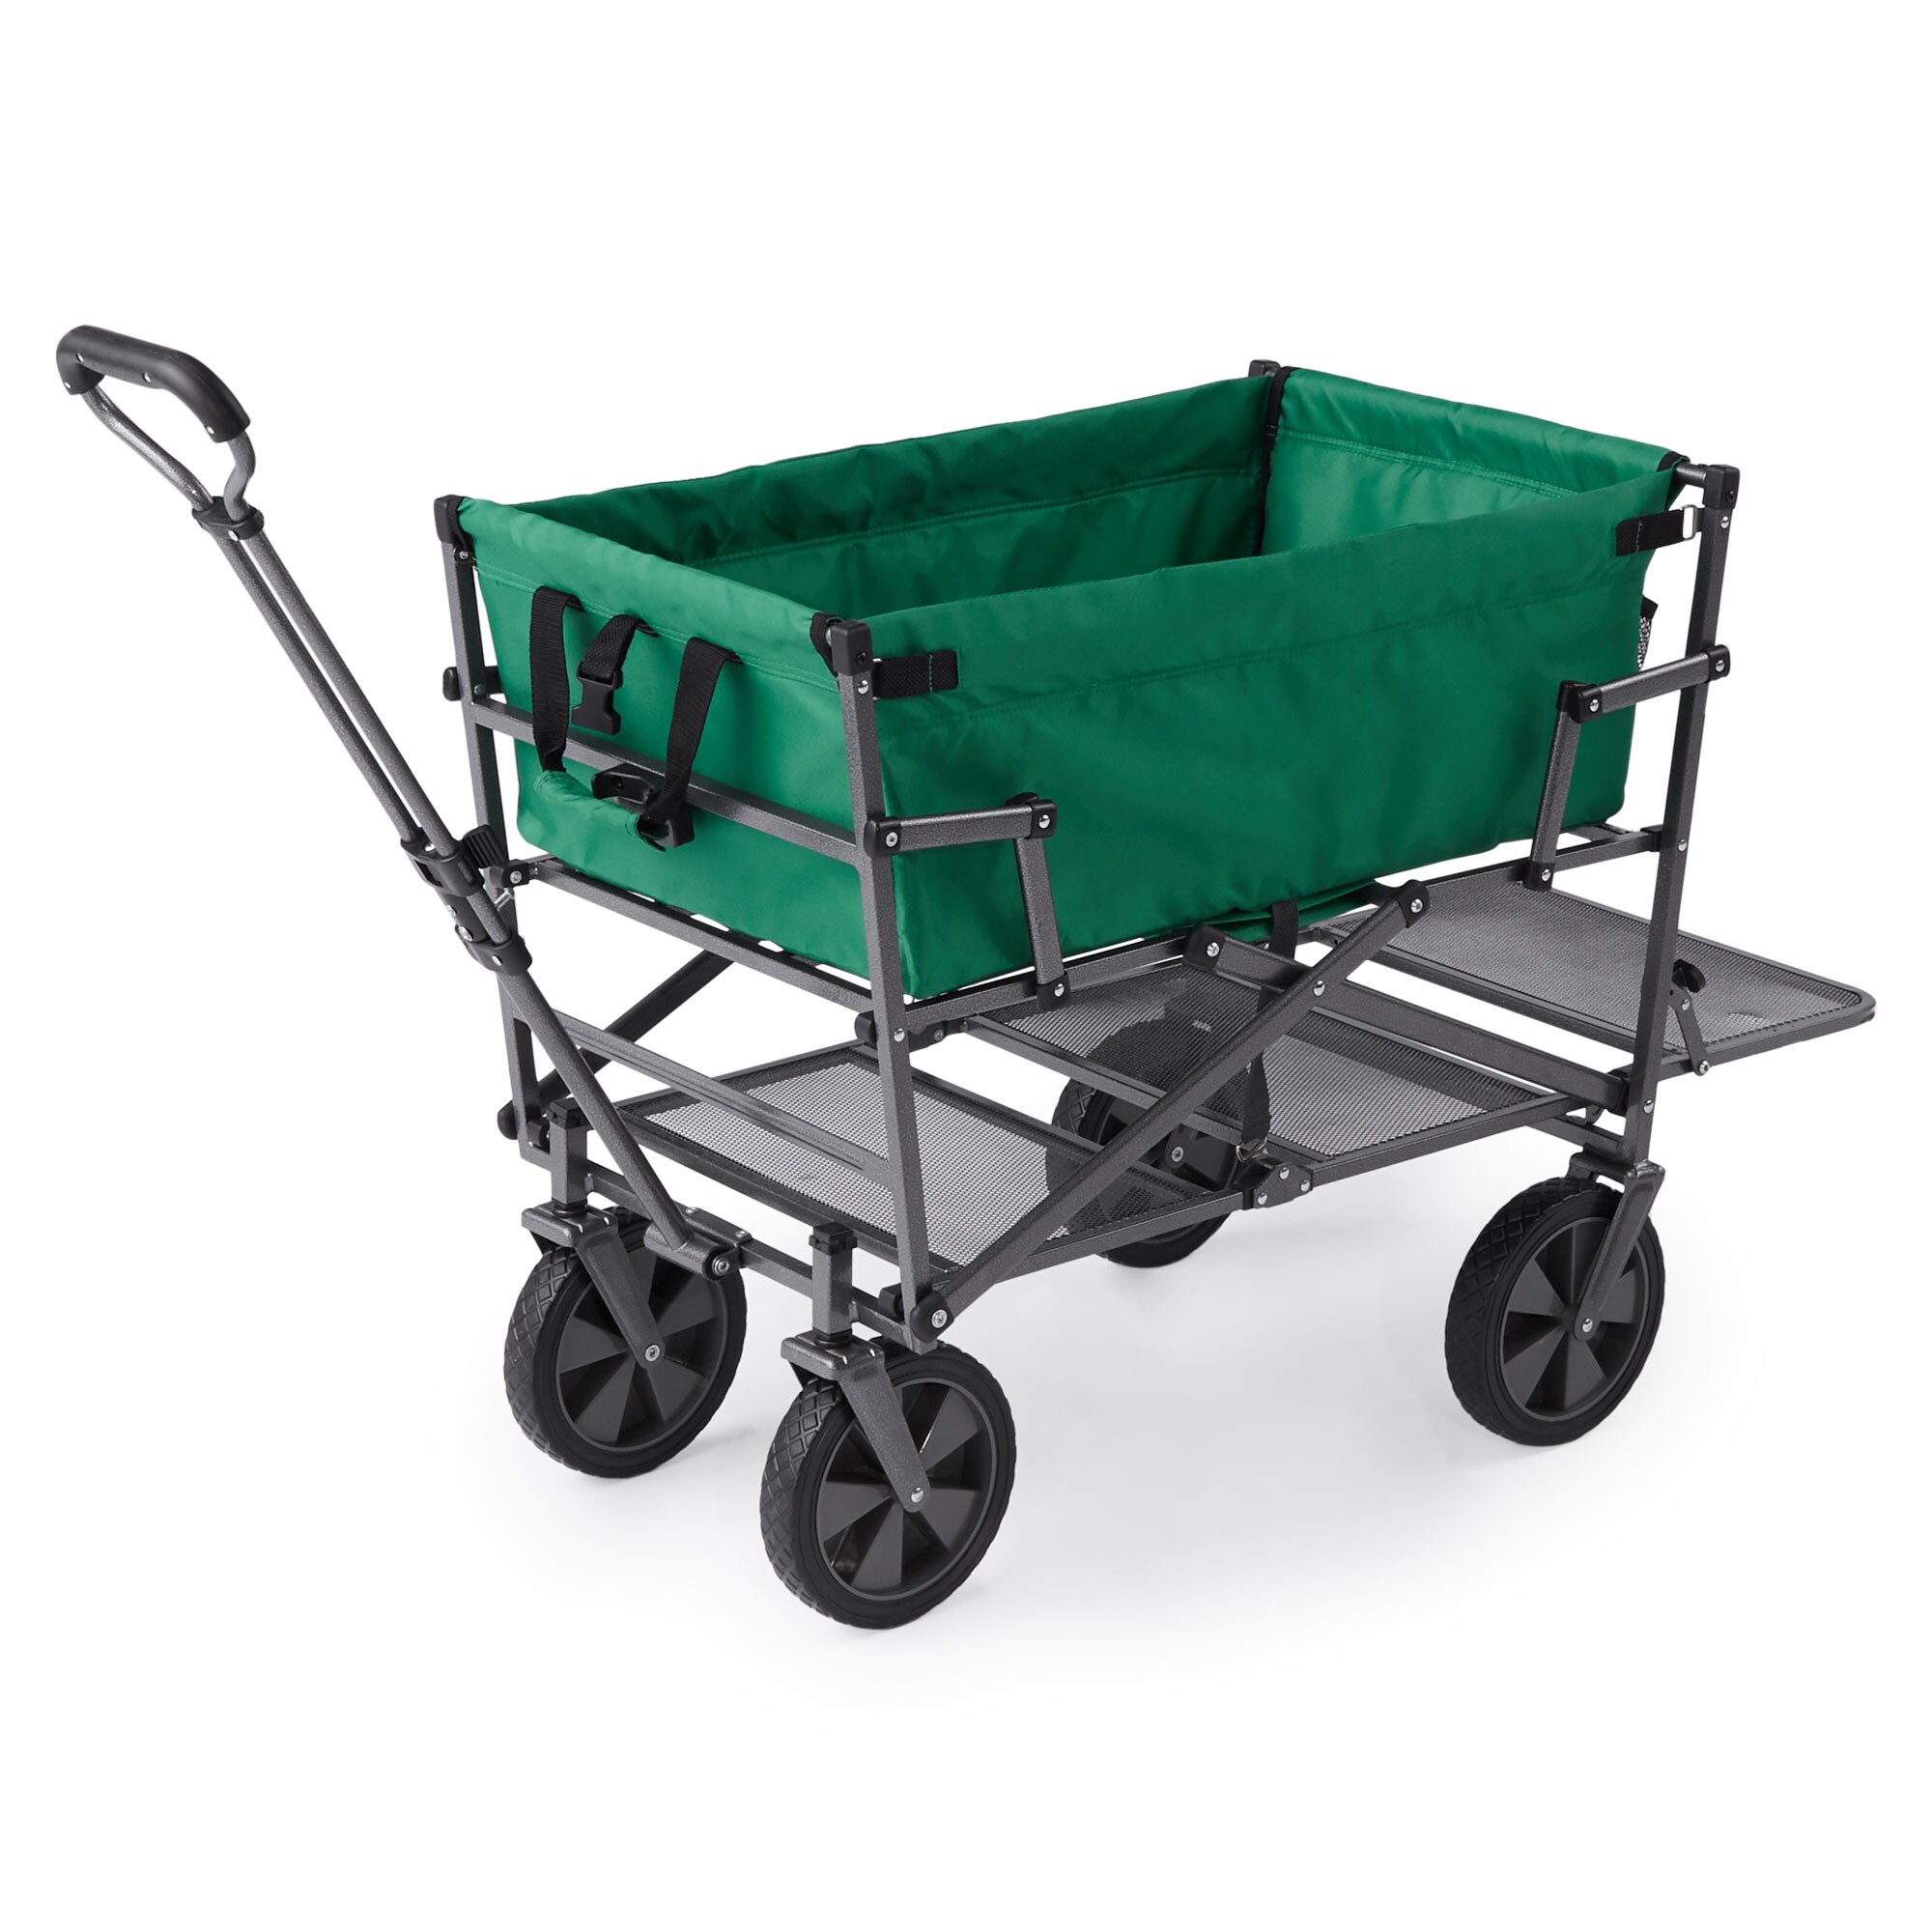 Green Timber Ridge Folding Wagon Collapsible Utility Outdoor Cart for Camping/Garden/Beach/All Terrain Side Bag & Cup Holders 